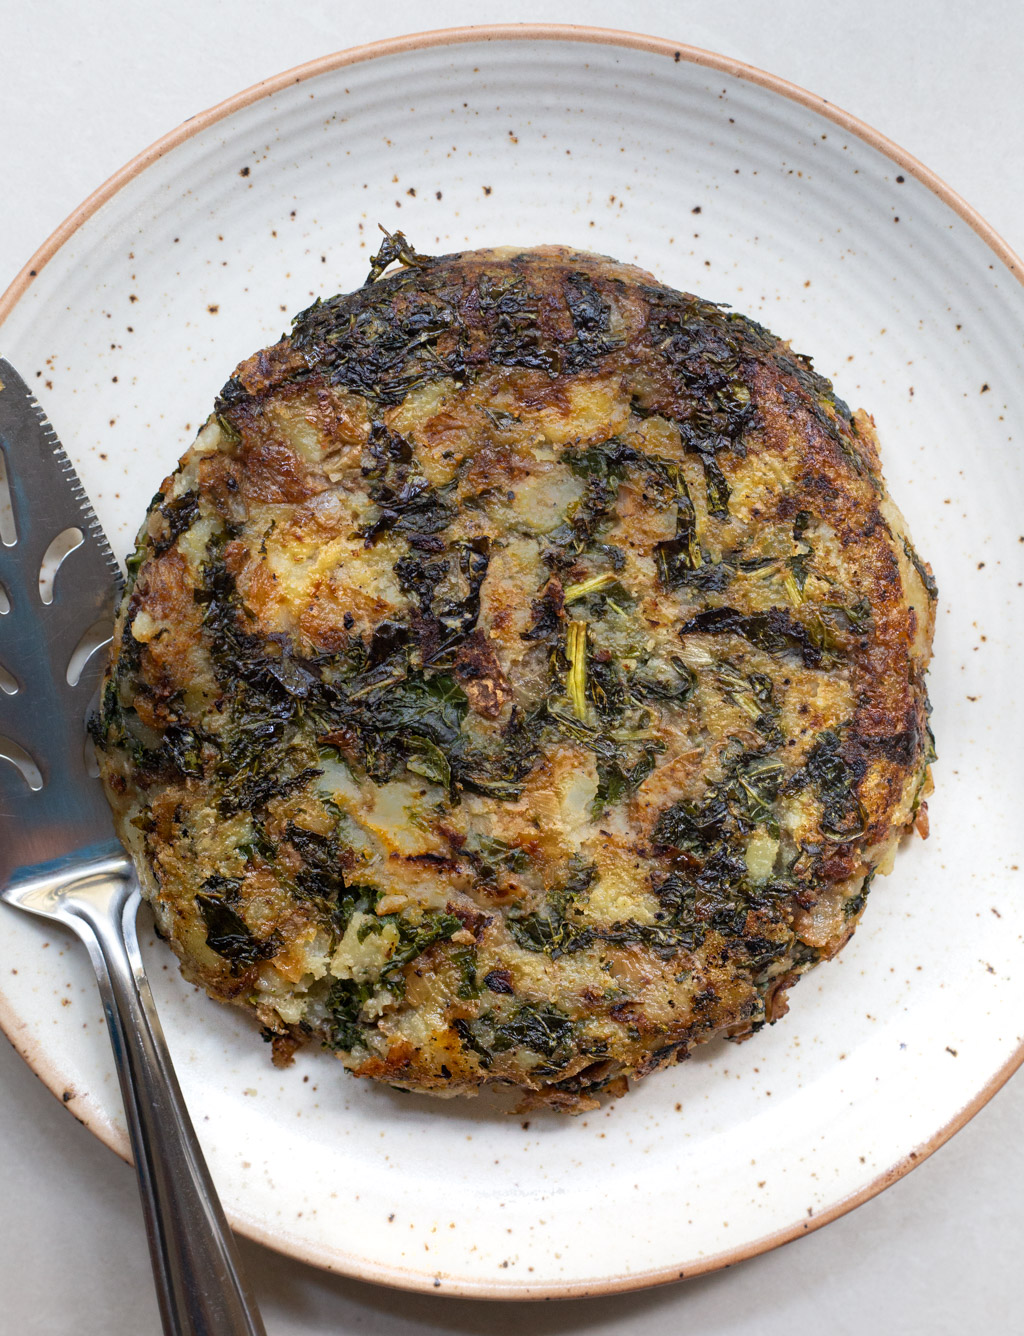 The Blurry Lime | KALE BUBBLE AND SQUEAK